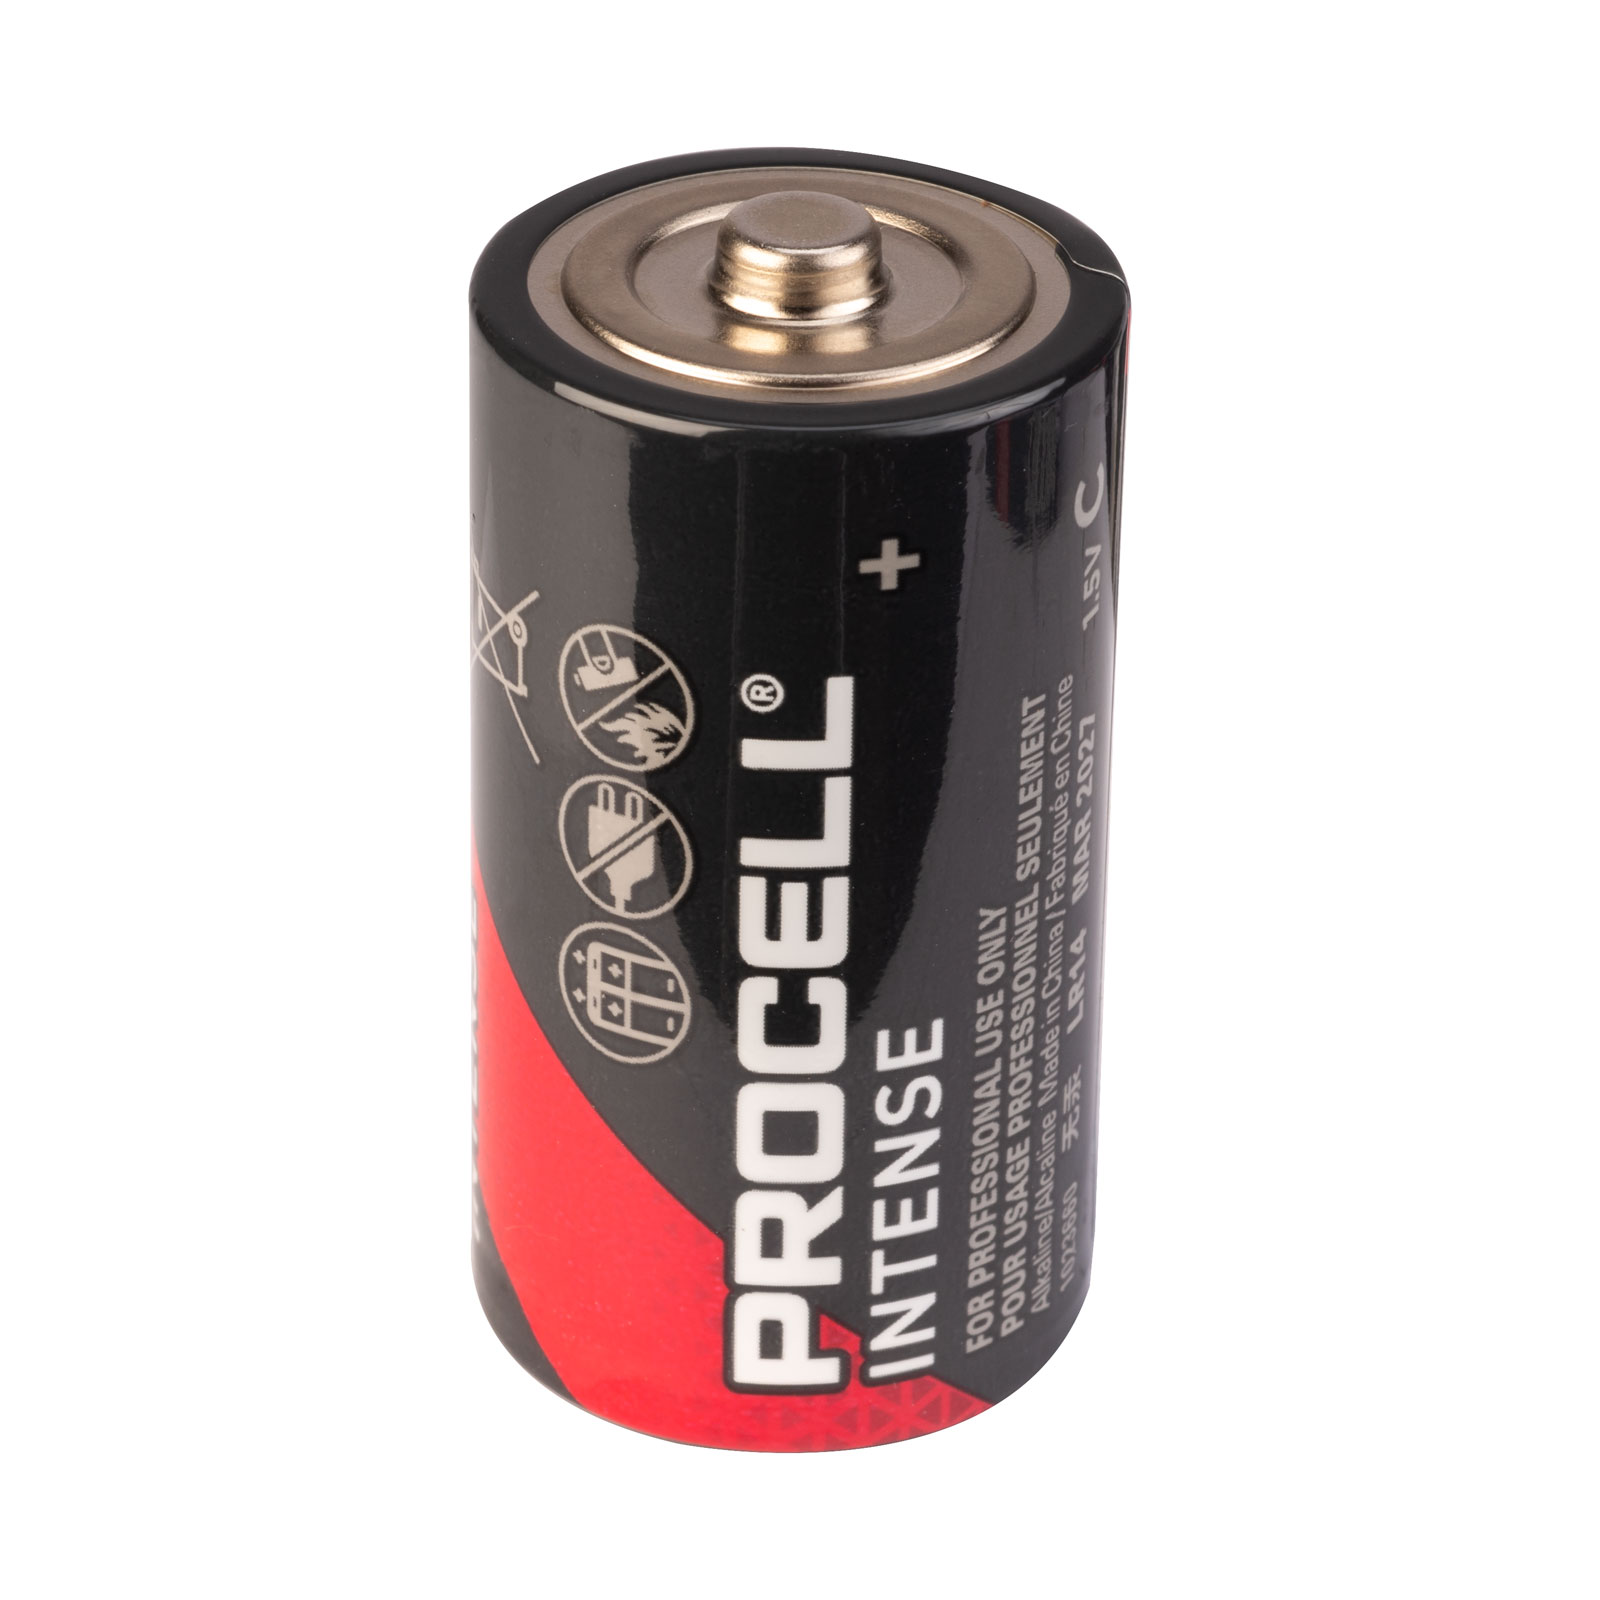 Full Power 1.5V Dry Cell Battery Lr14 C Size - China C Size Battery and 4 C  Battery price